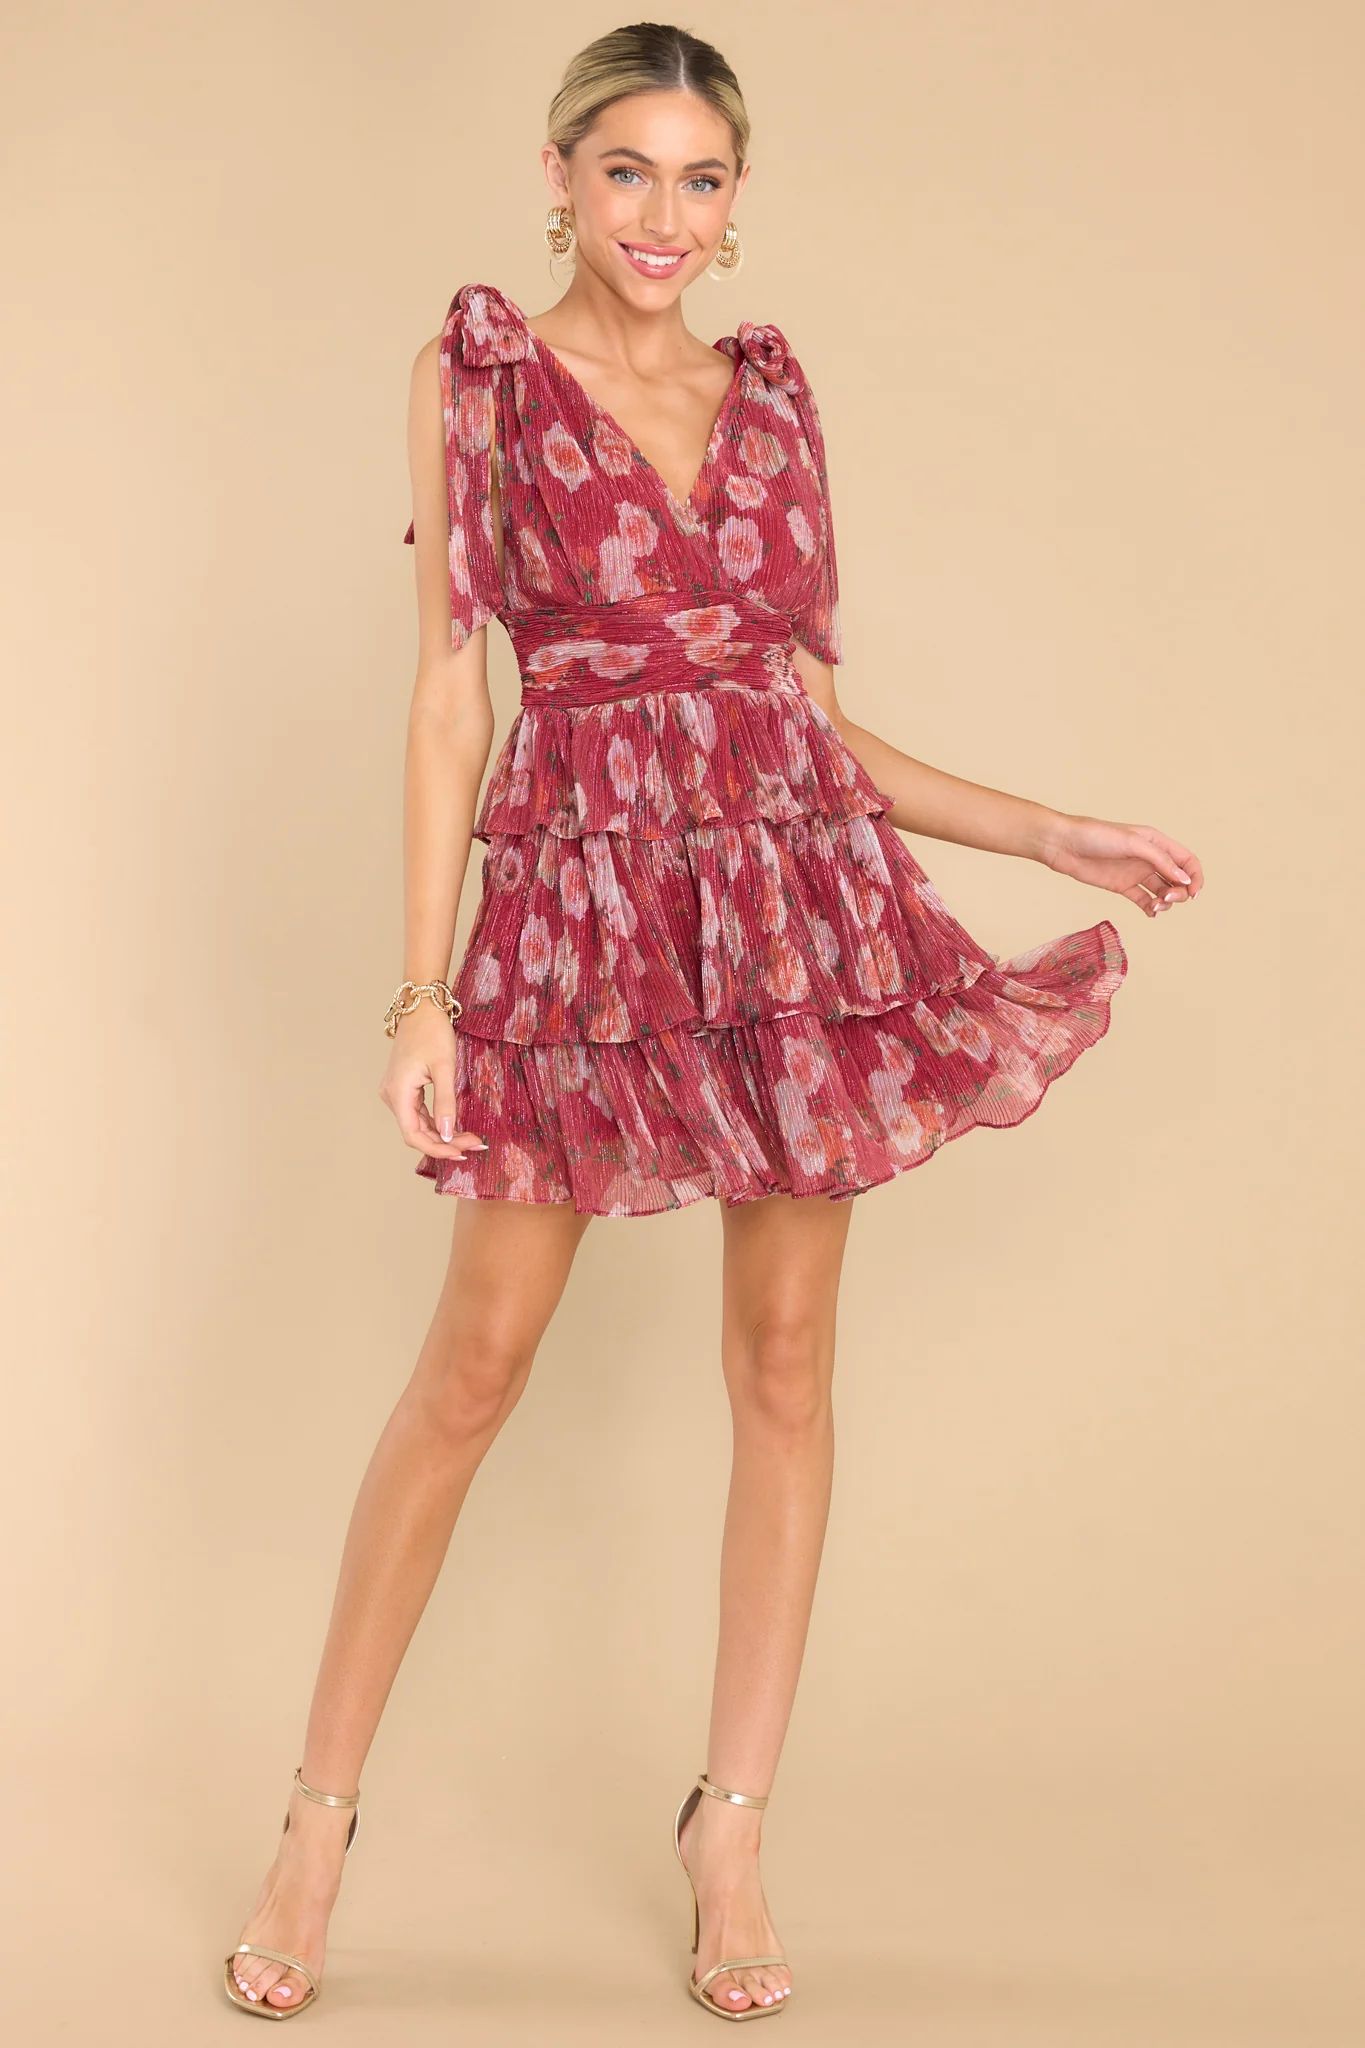 Tailored To Me Burgundy Floral Print Dress | Red Dress 